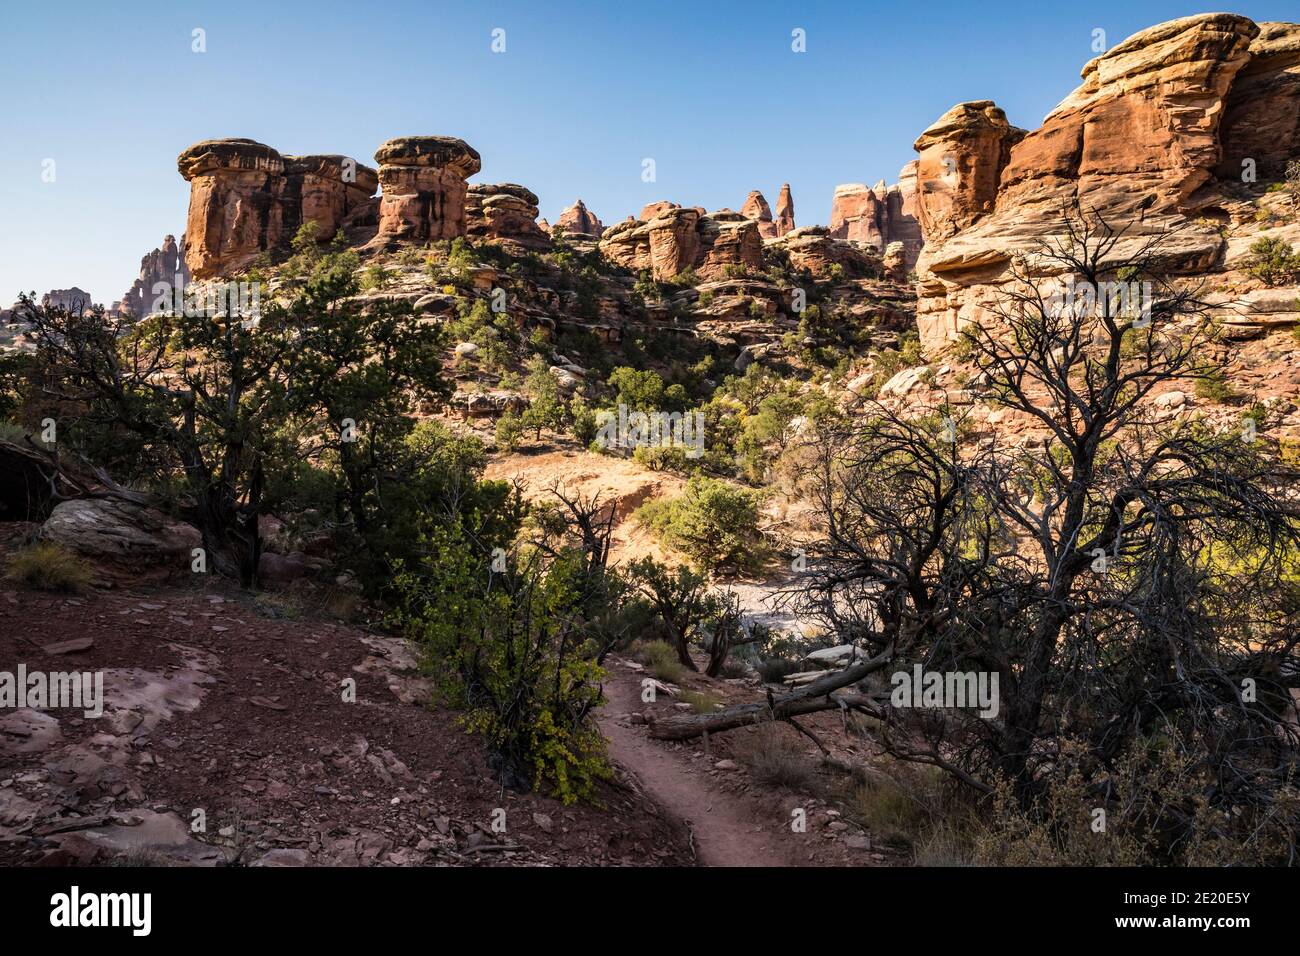 Along the Chesler Park trail, the Needles district, Canyonlands National Park, Utah, USA. Stock Photo